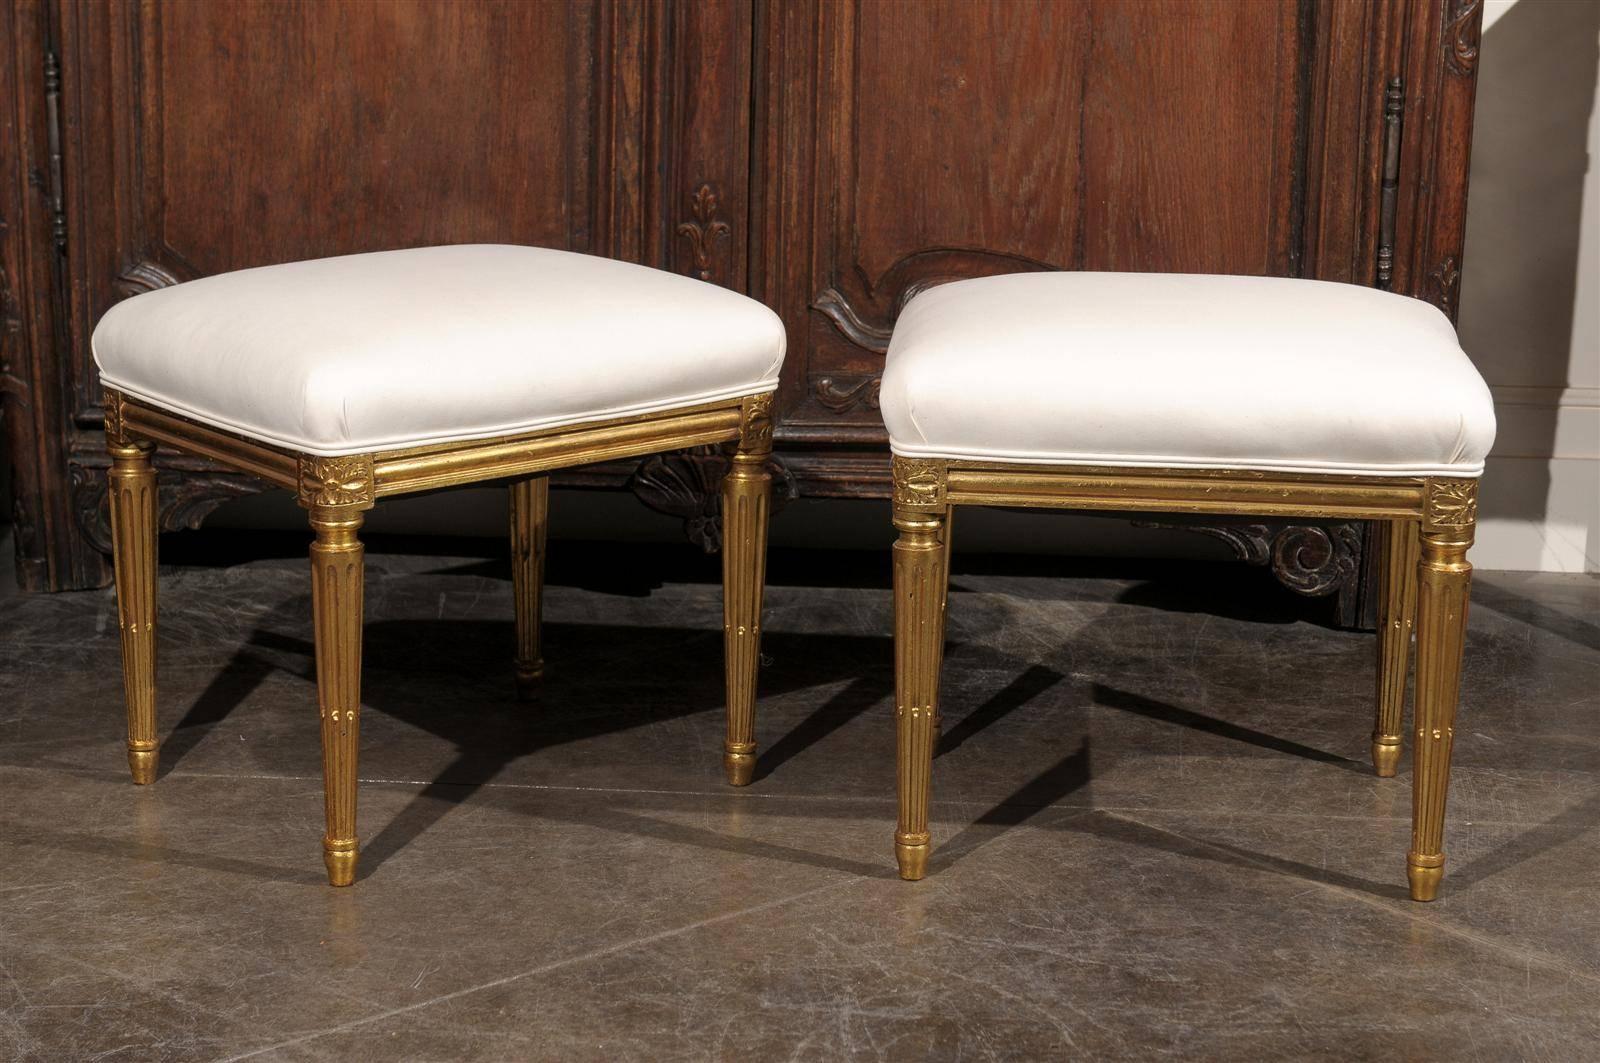 A pair of French upholstered and gilded stools from the early 20th century. This elegant pair of French Louis XVI style stools from circa 1920 features a new muslin upholstery applied on the rectangular seat. The body of the stools is made of gilded